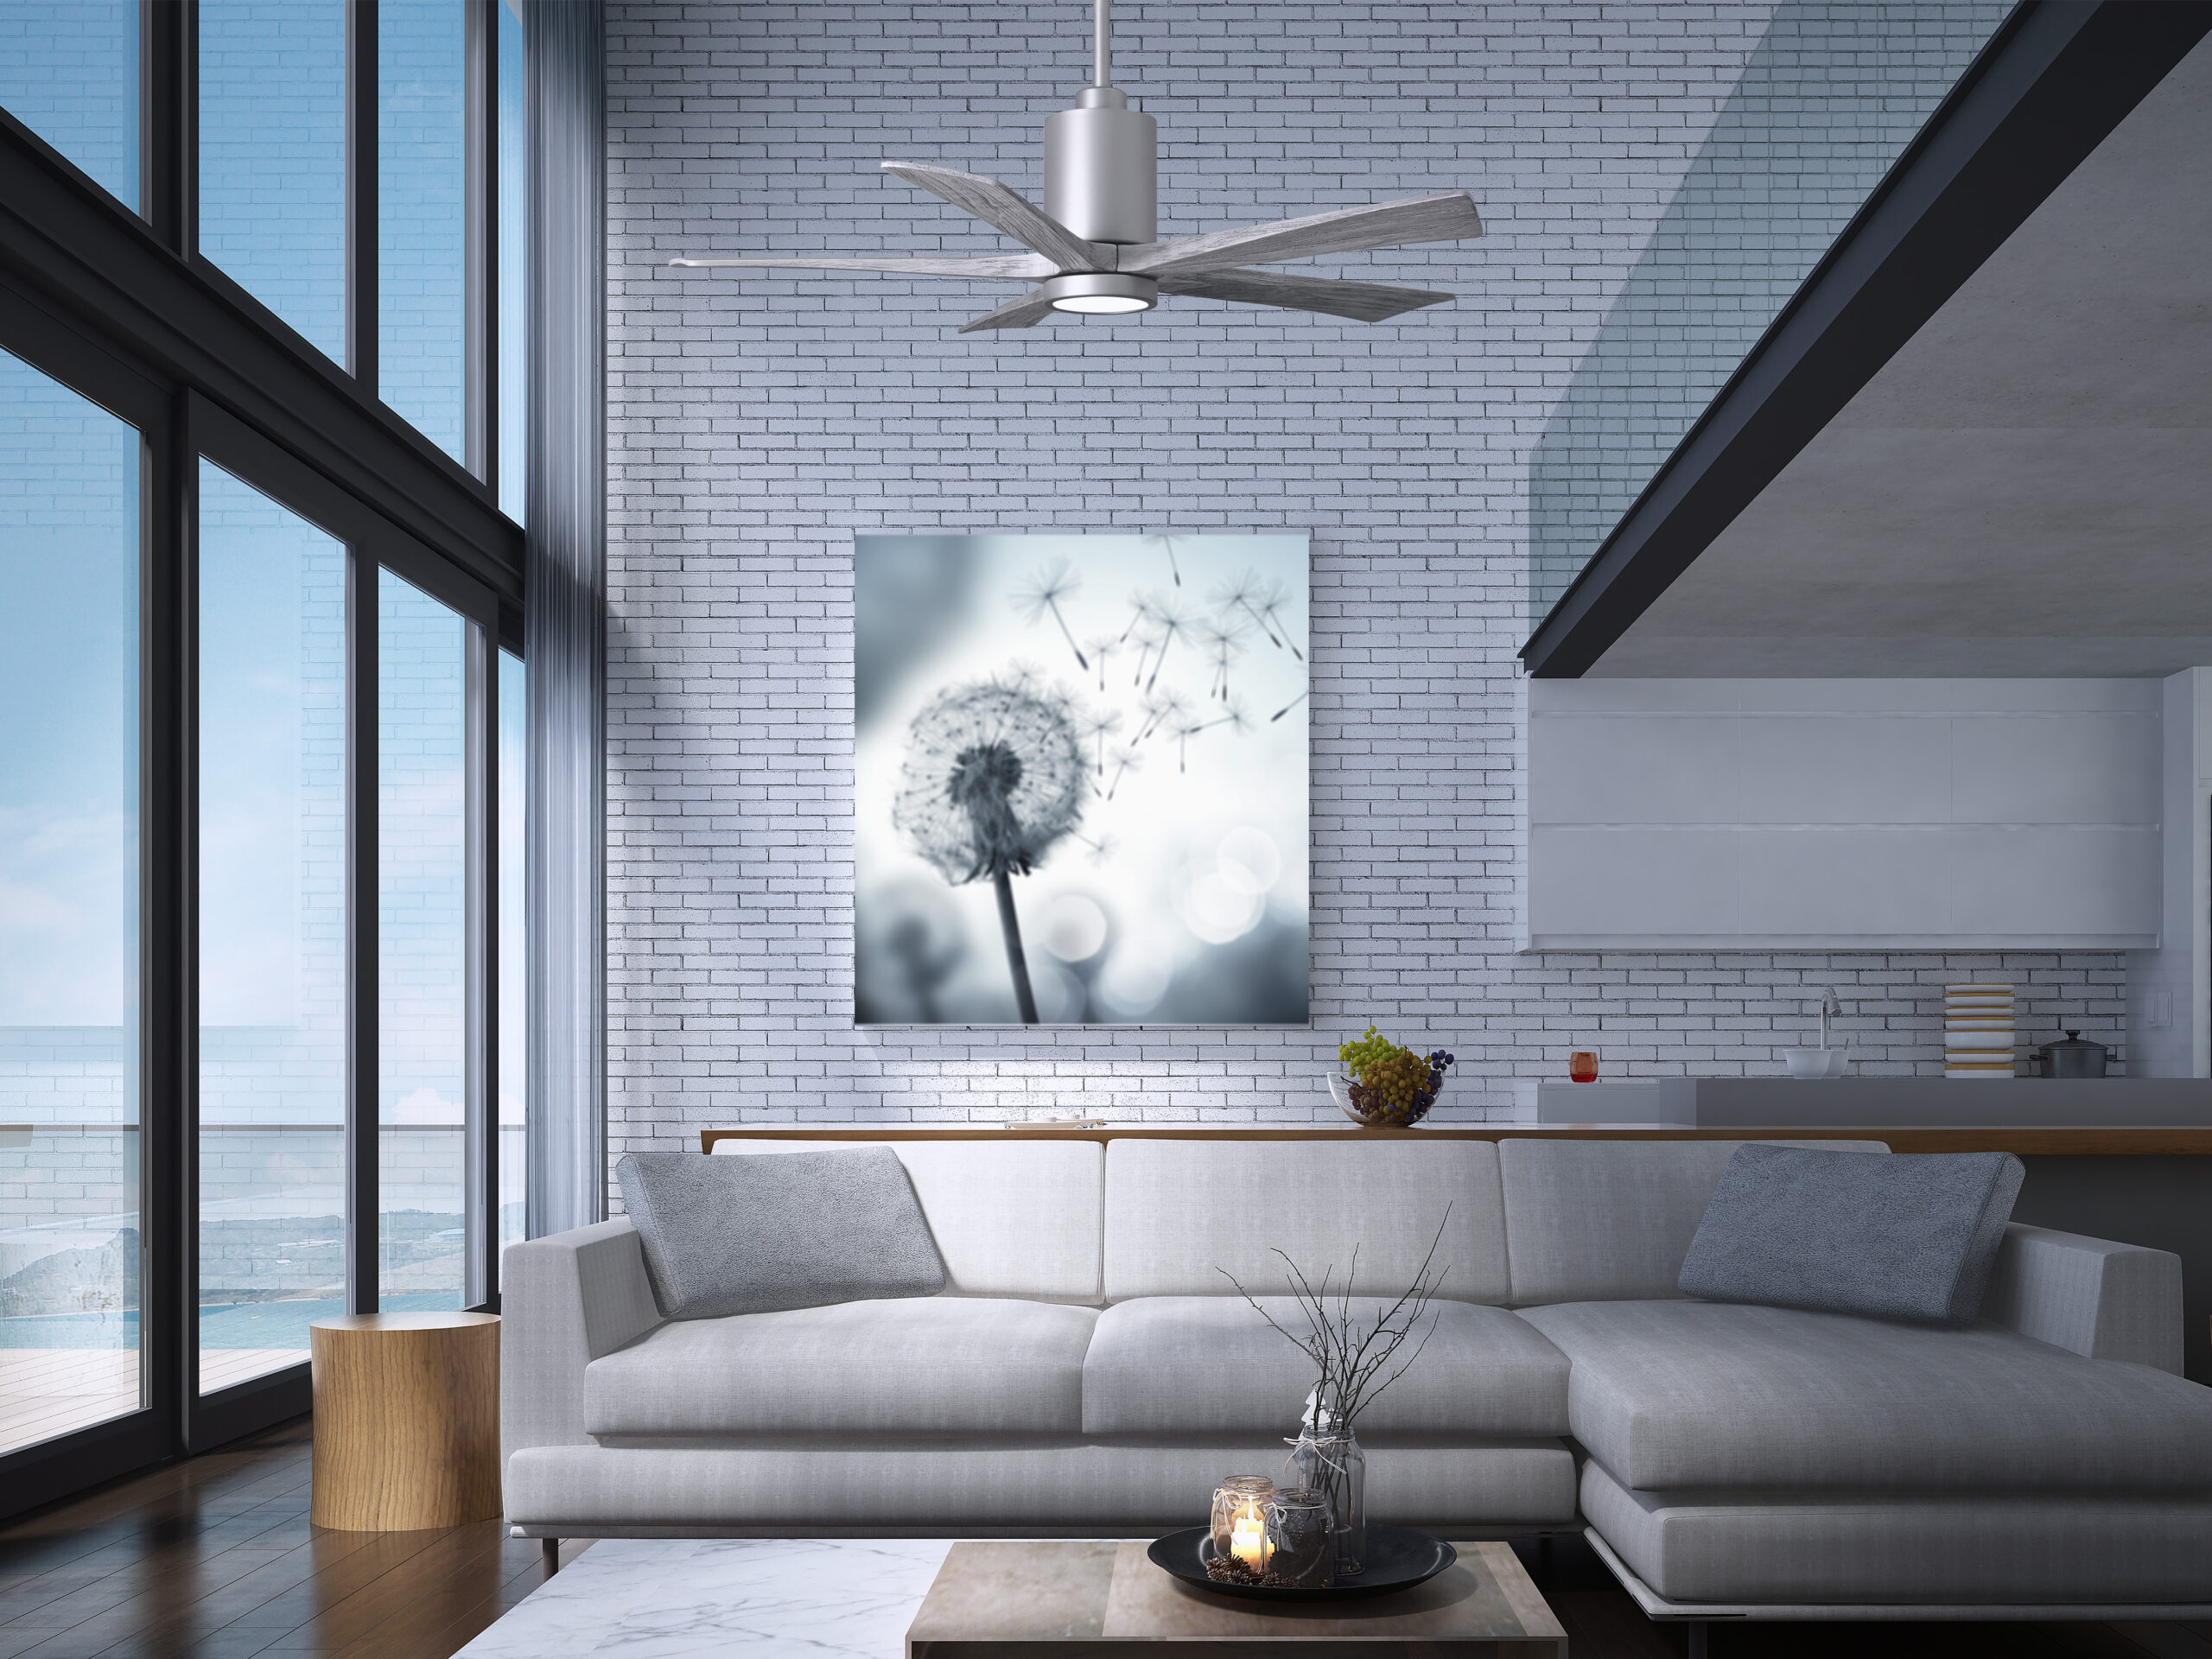 Patricia-5 ceiling fan in brushed nickels with 60